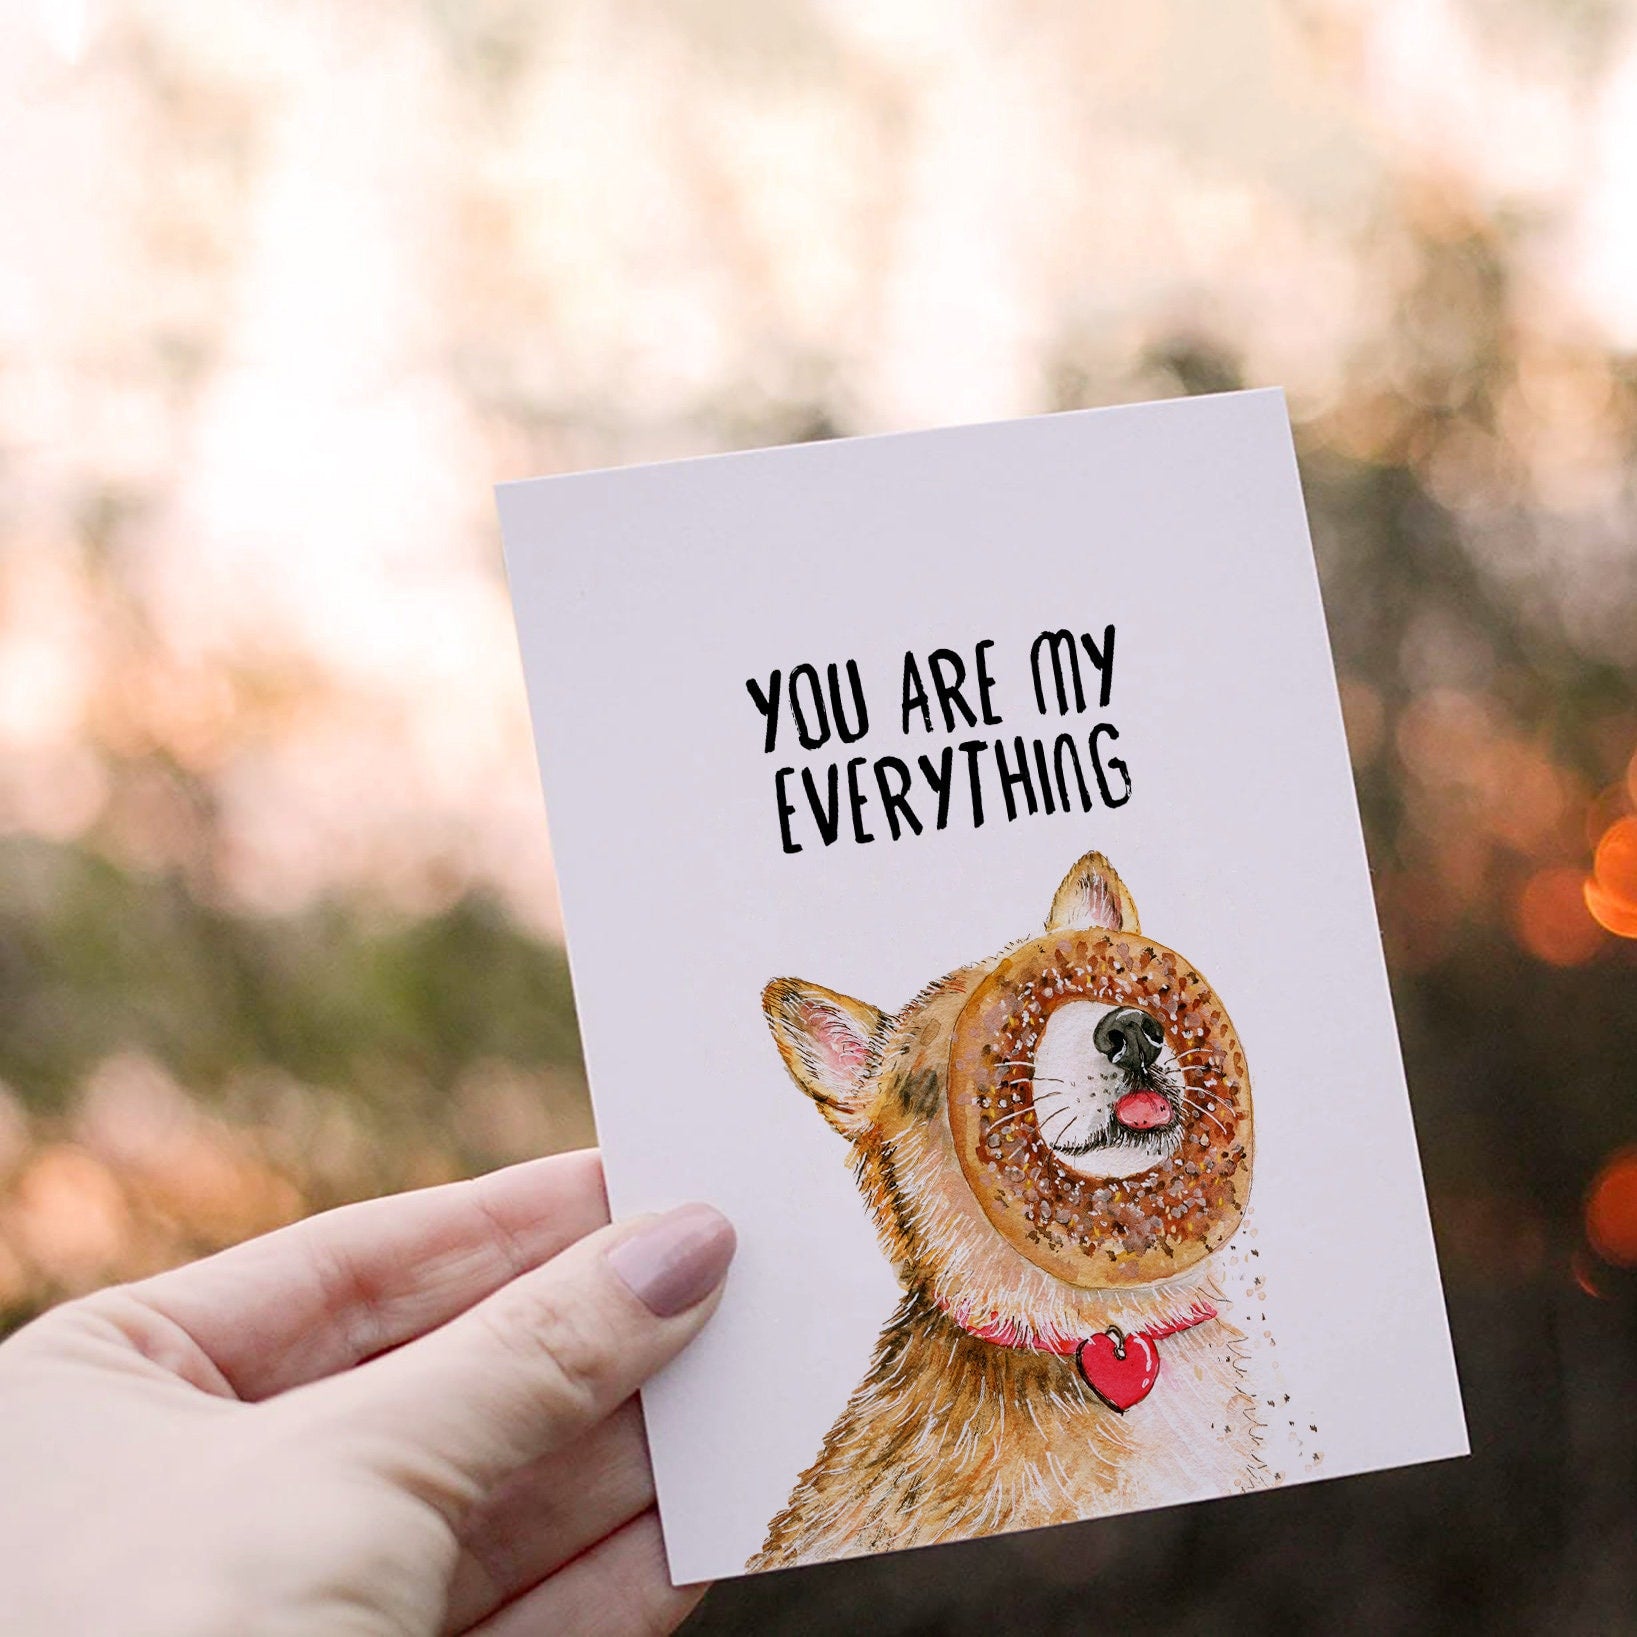 You Are My Everything Bagel - Funny Valentines Day Cards For Boyfriend - Corgi Funny Anniversary Card For Husband Wife - Dog Lover Gifts